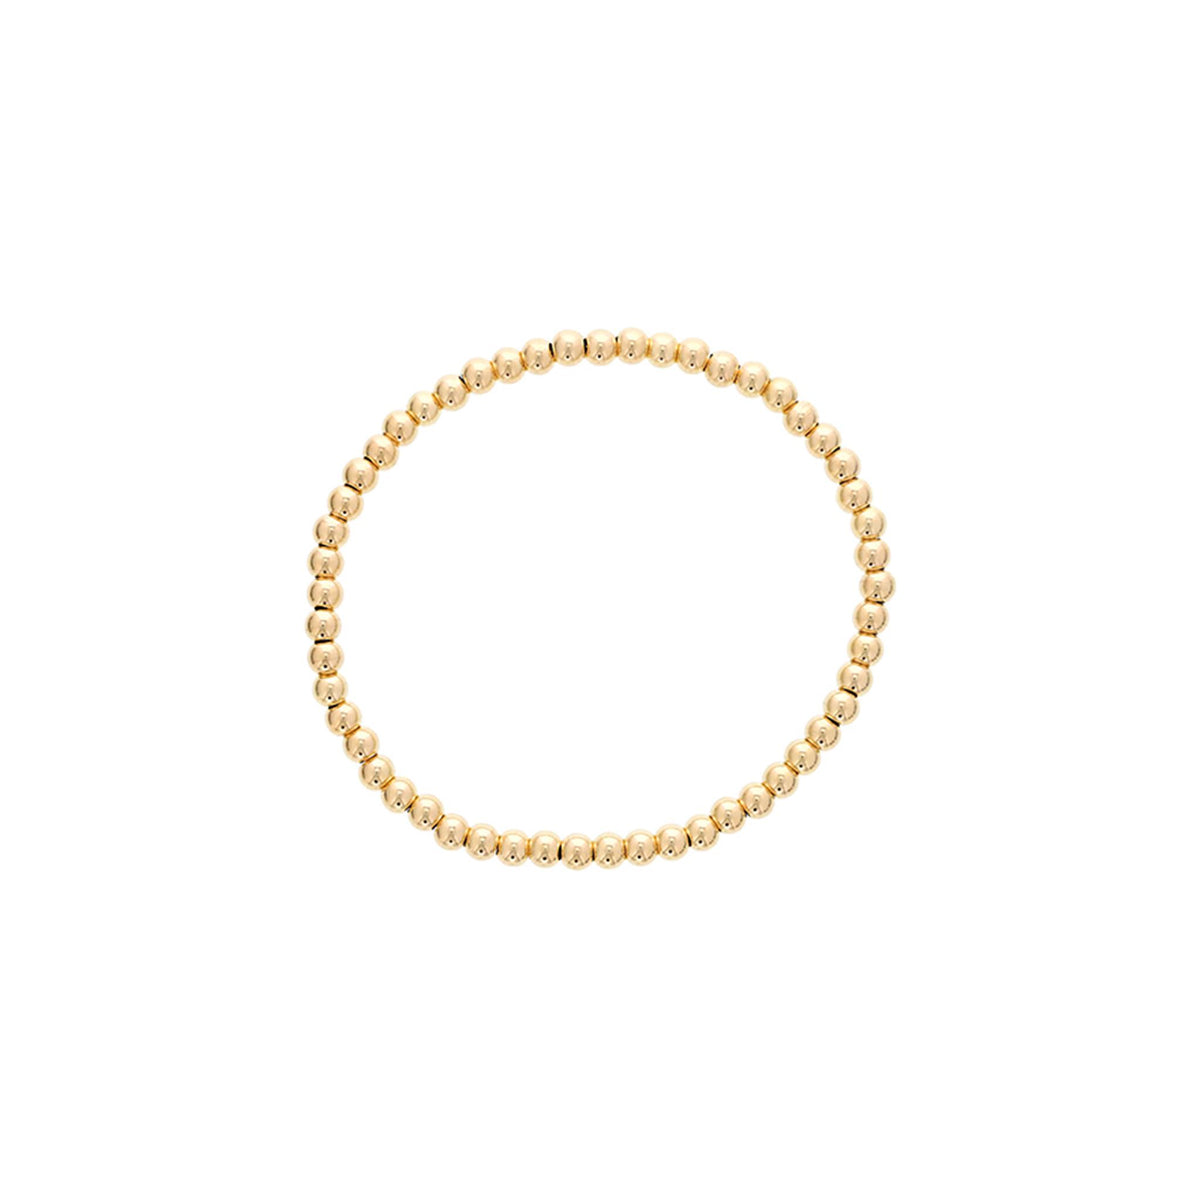 Gold Filled Yellow Gold Bead Bracelet